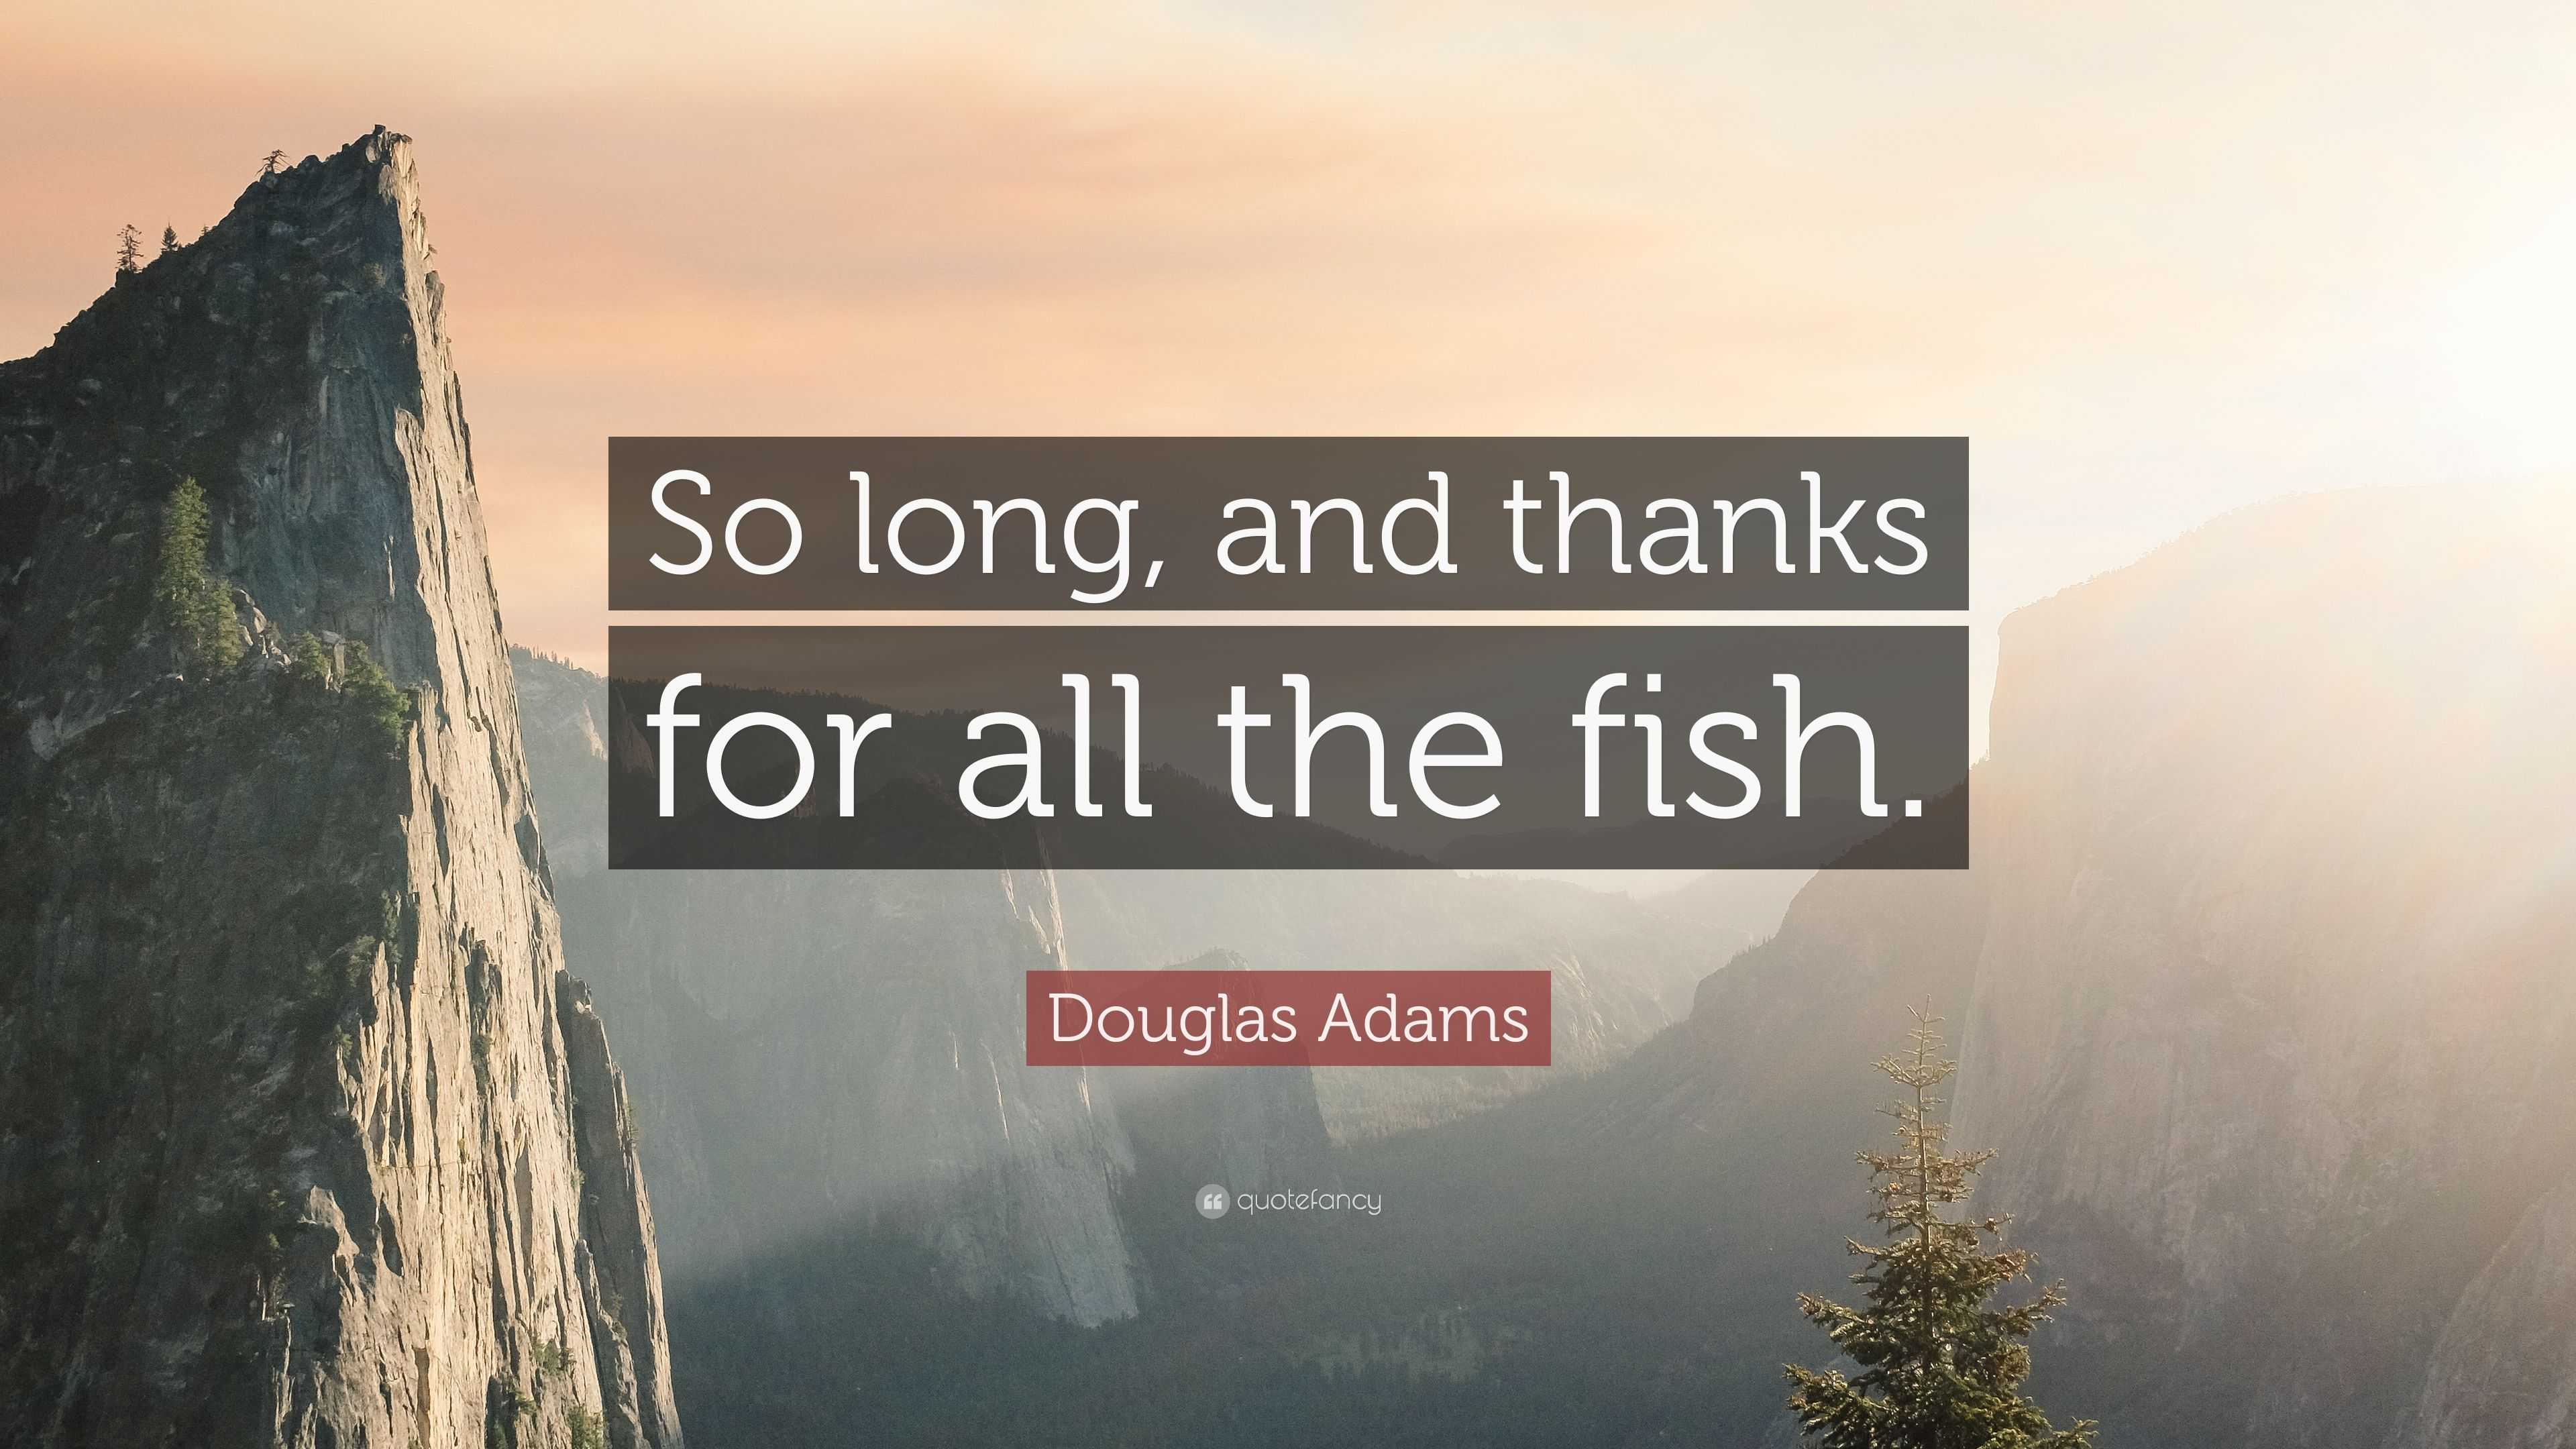 Douglas Adams Quote: "So long, and thanks for all the fish." (17 wallpapers) - Quotefancy